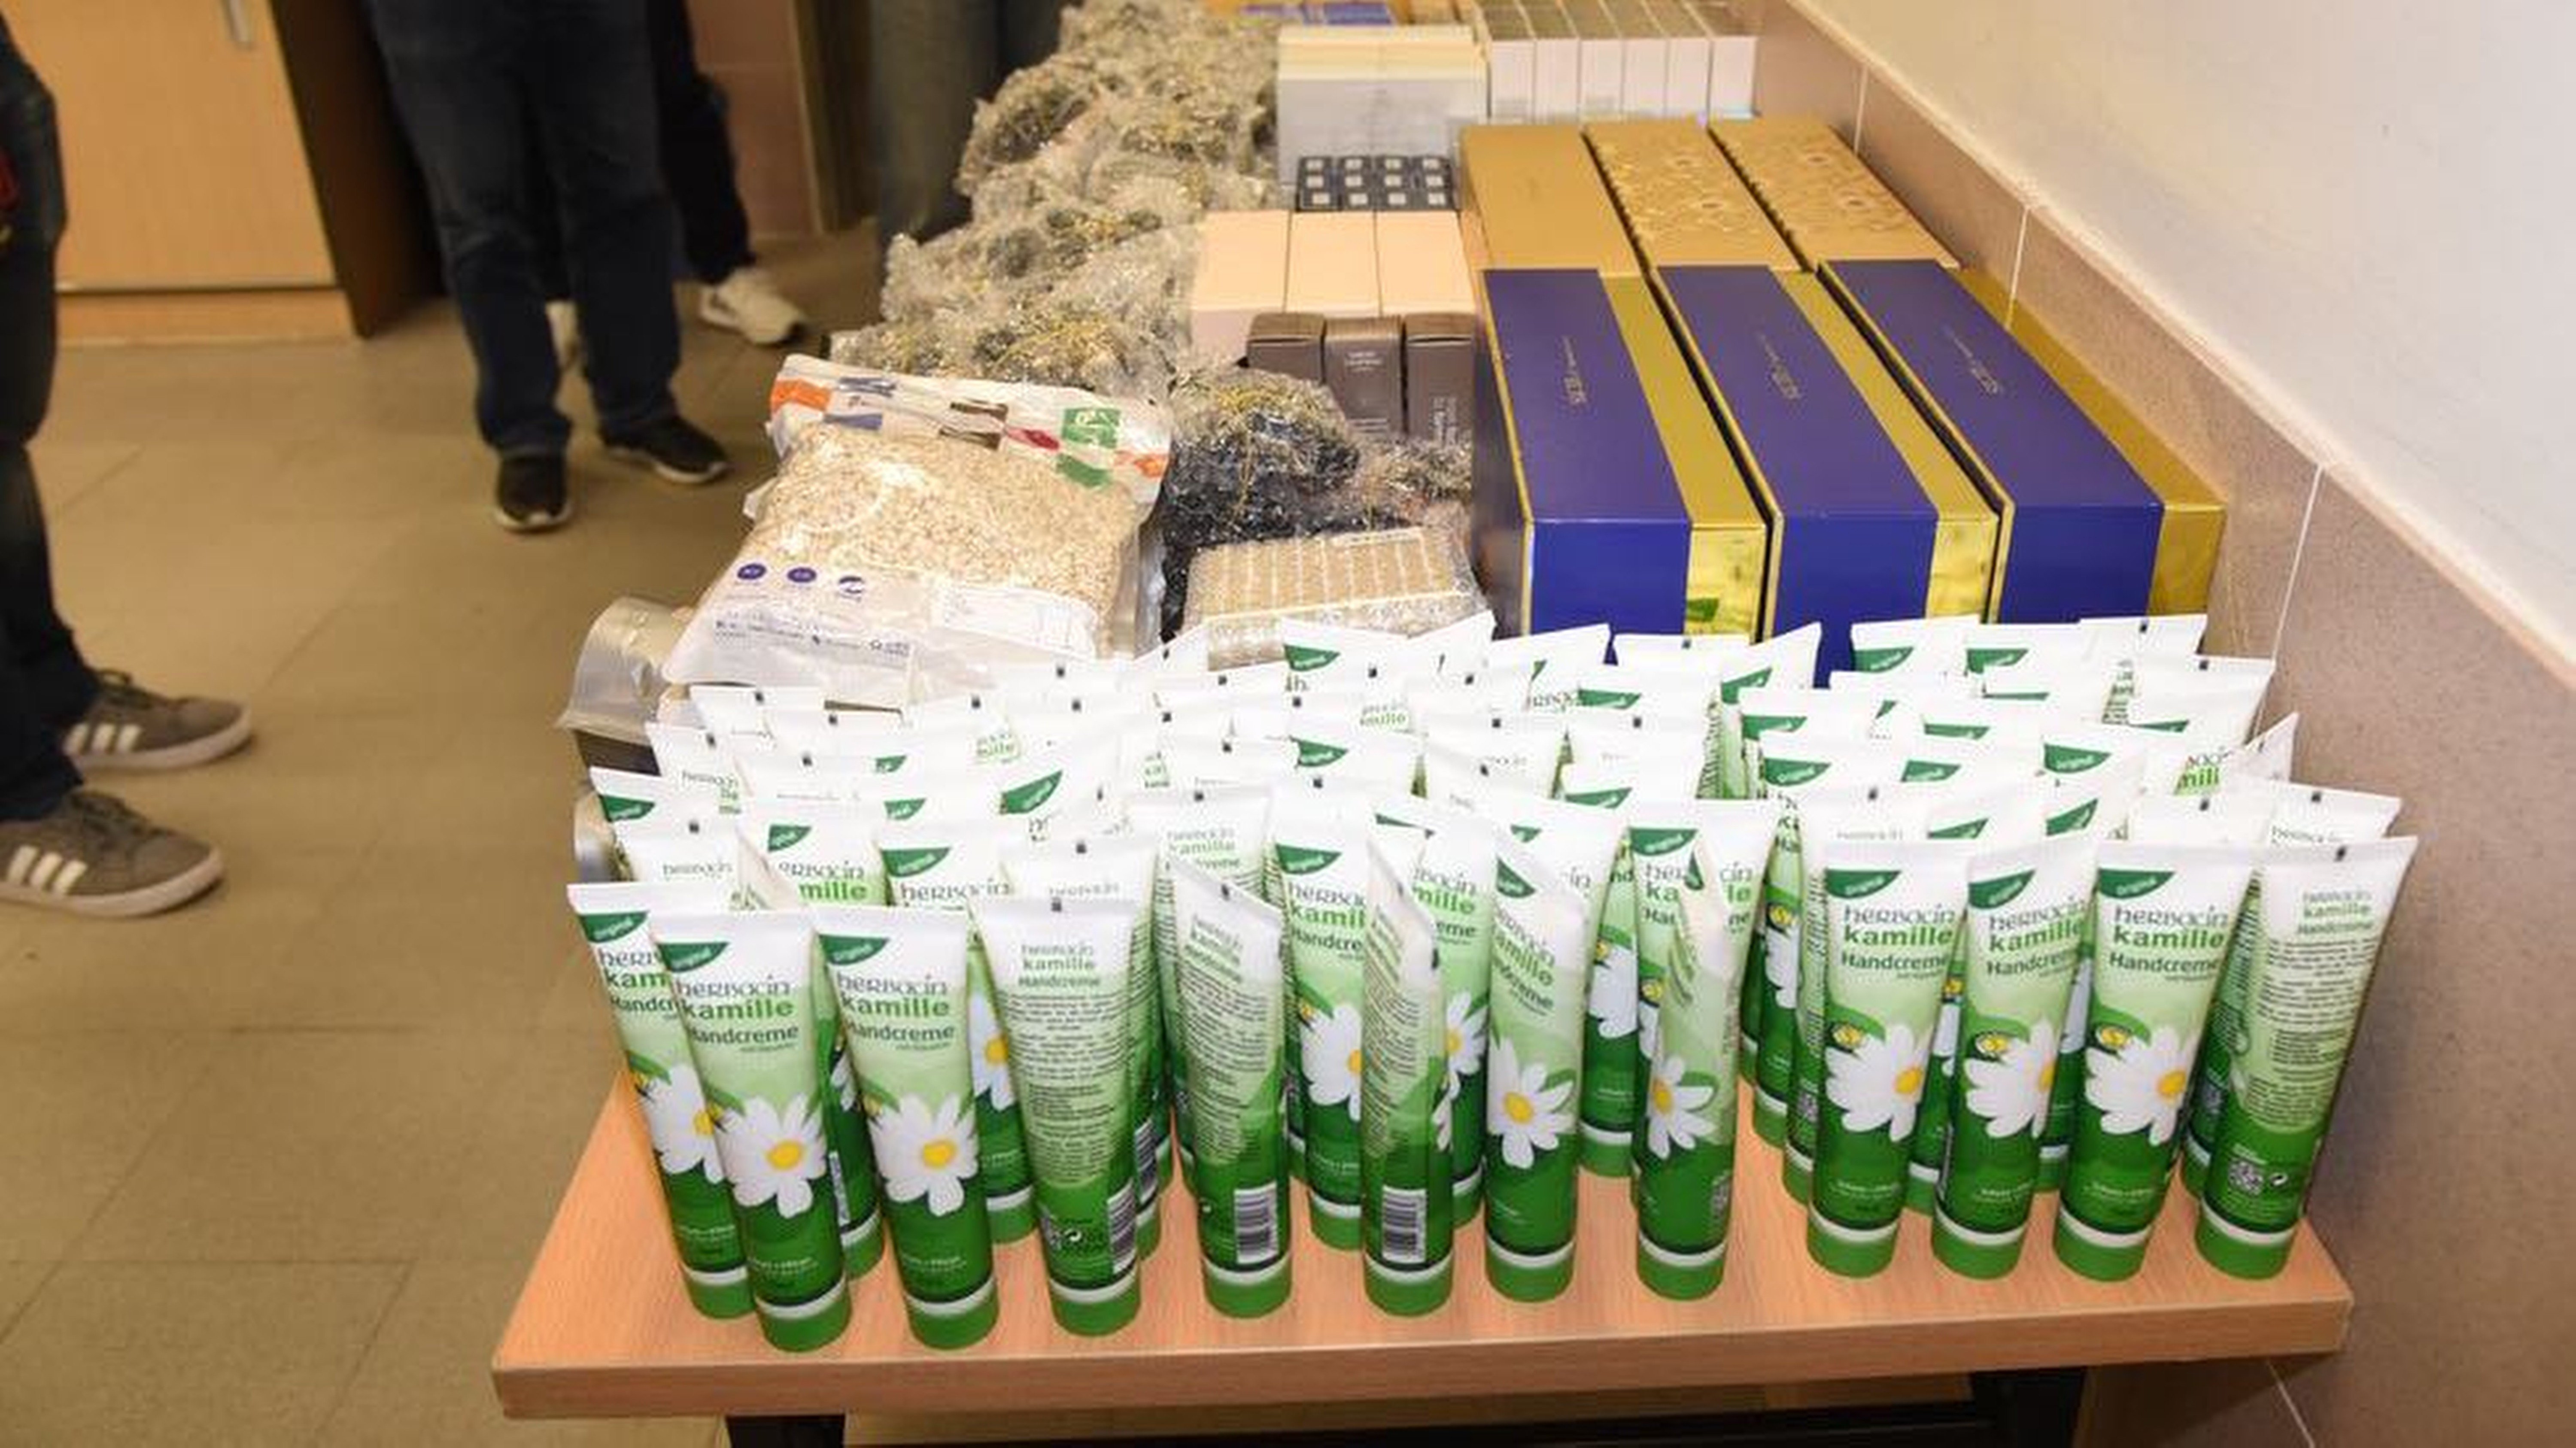 Eight men and one woman from mainland China were arrested with HK$160,000-worth tax-free goods on Thursday in a police operation to crack down parallel trading in Tin Shui Wai, a town close to a cross-border bridge connecting the northwest New Territories with Shenzhen. Picture shows the goods confiscated by police. 18JAN19. Handout